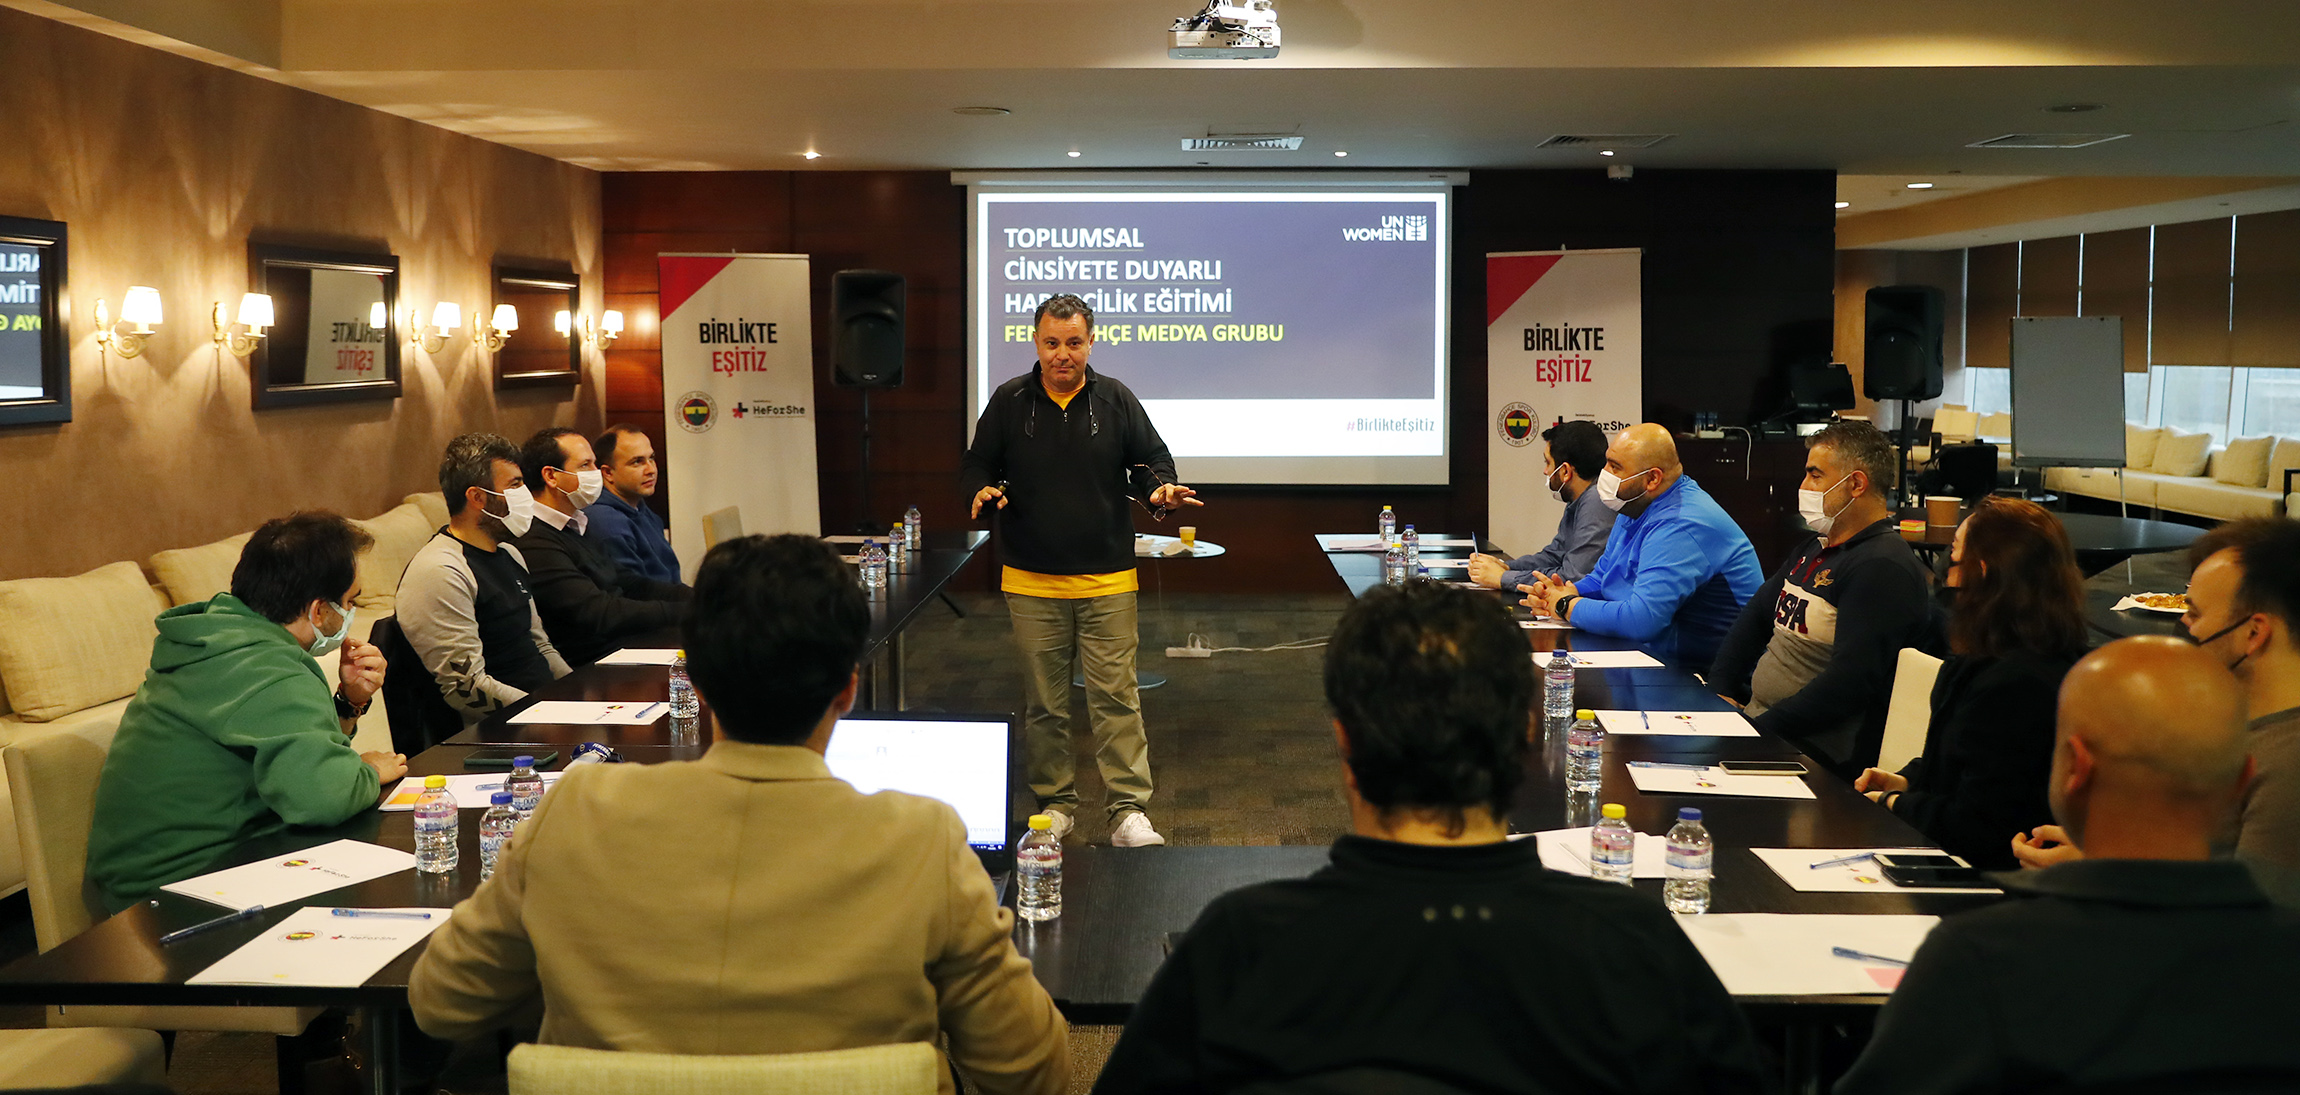 A gender-responsive media training was held at the Fenerbahçe Sports Club in April 2022. Photo: Courtesy of Fenerbahçe Sports Club